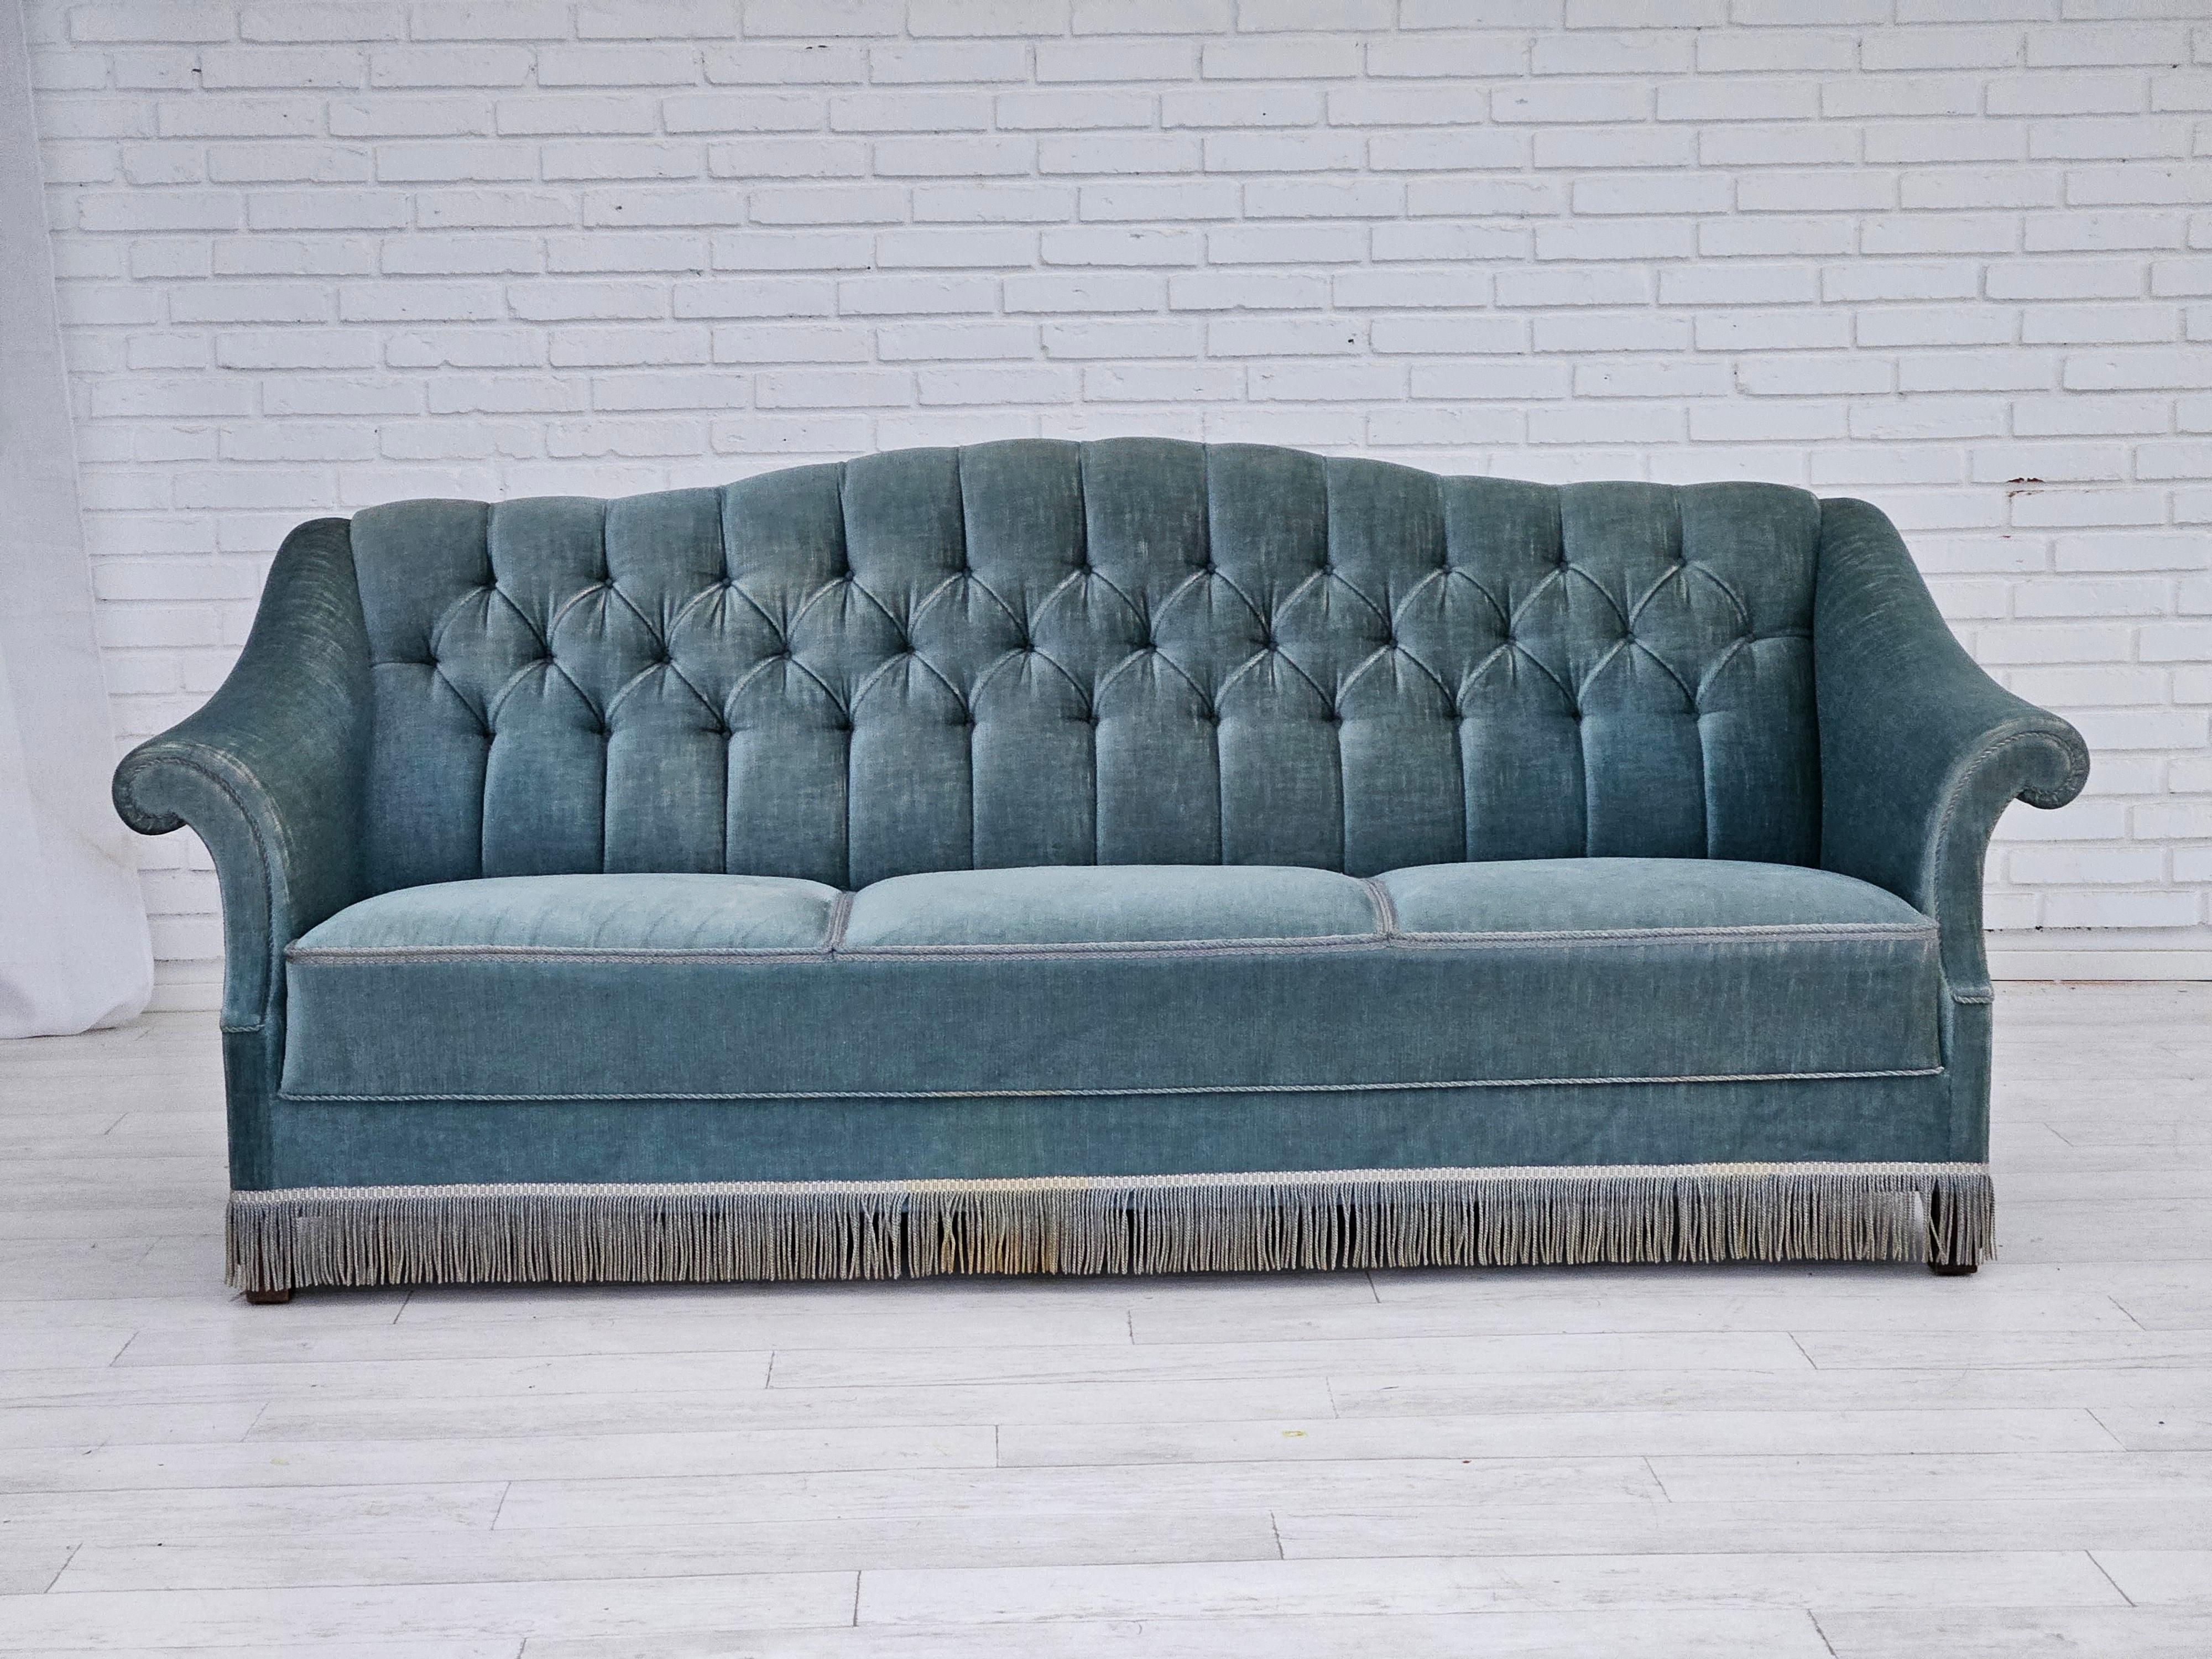 1950s-60s, Danish 3 seater sofa in original light blue velour. Original good condition with nice patina: no smells and no stains. Beech wood legs, springs in the seat. Manufactured by Danish furniture manufacturer in about 1955s.